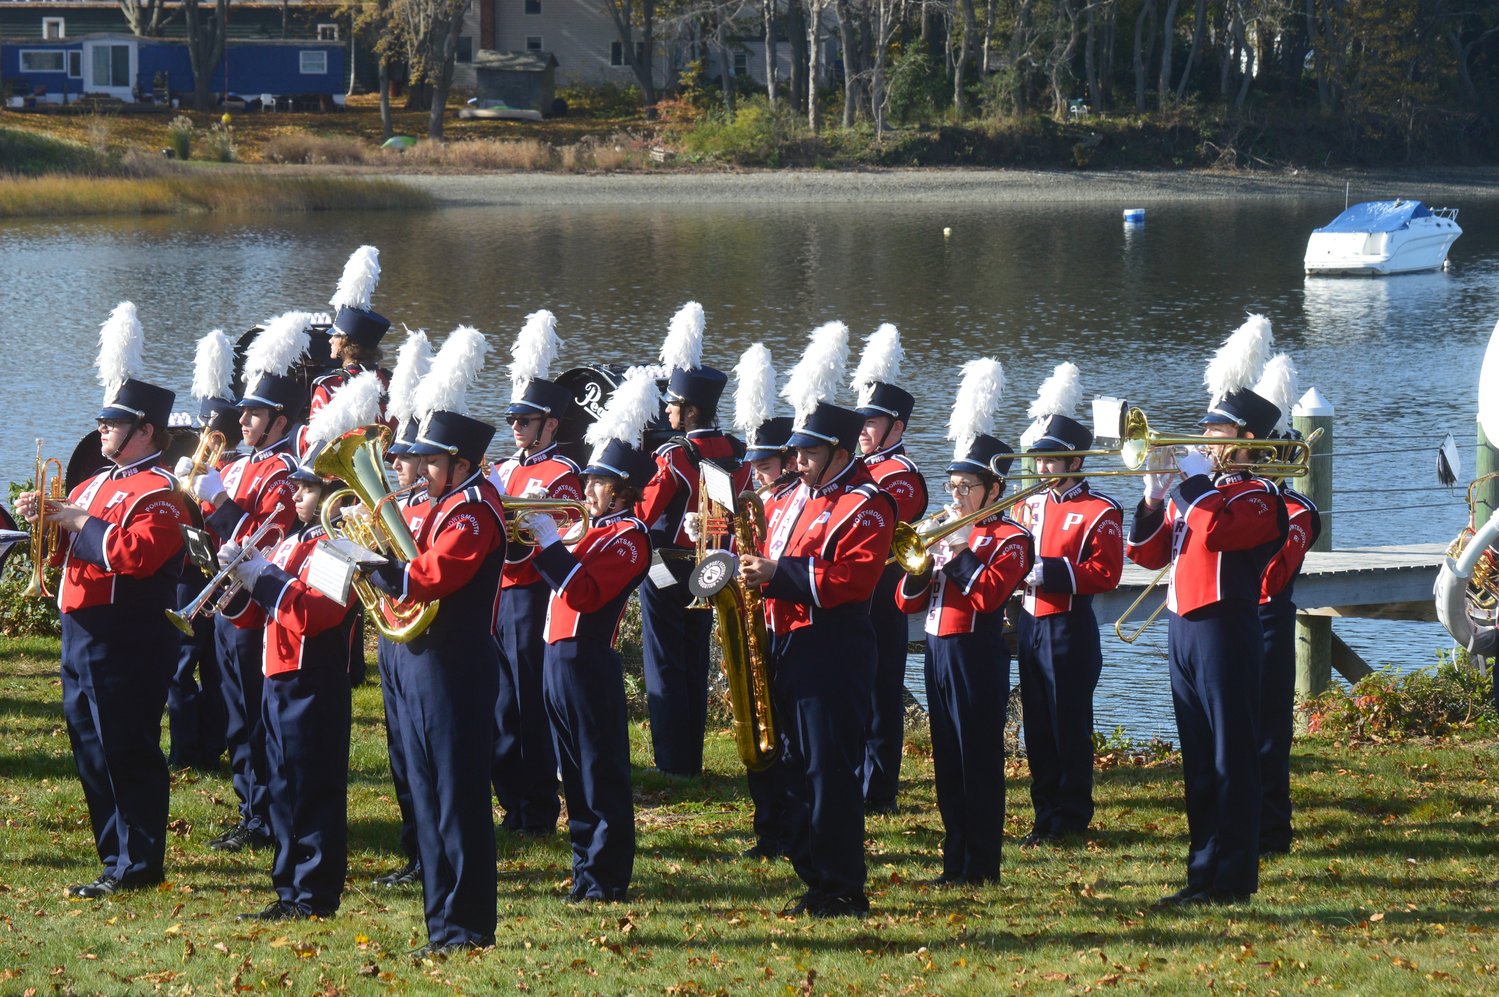 The PHS Marching Band performs on the back lawn of Thriving Tree Coffee House, overlooking Blue Bill Cove, in a tribute to veterans.